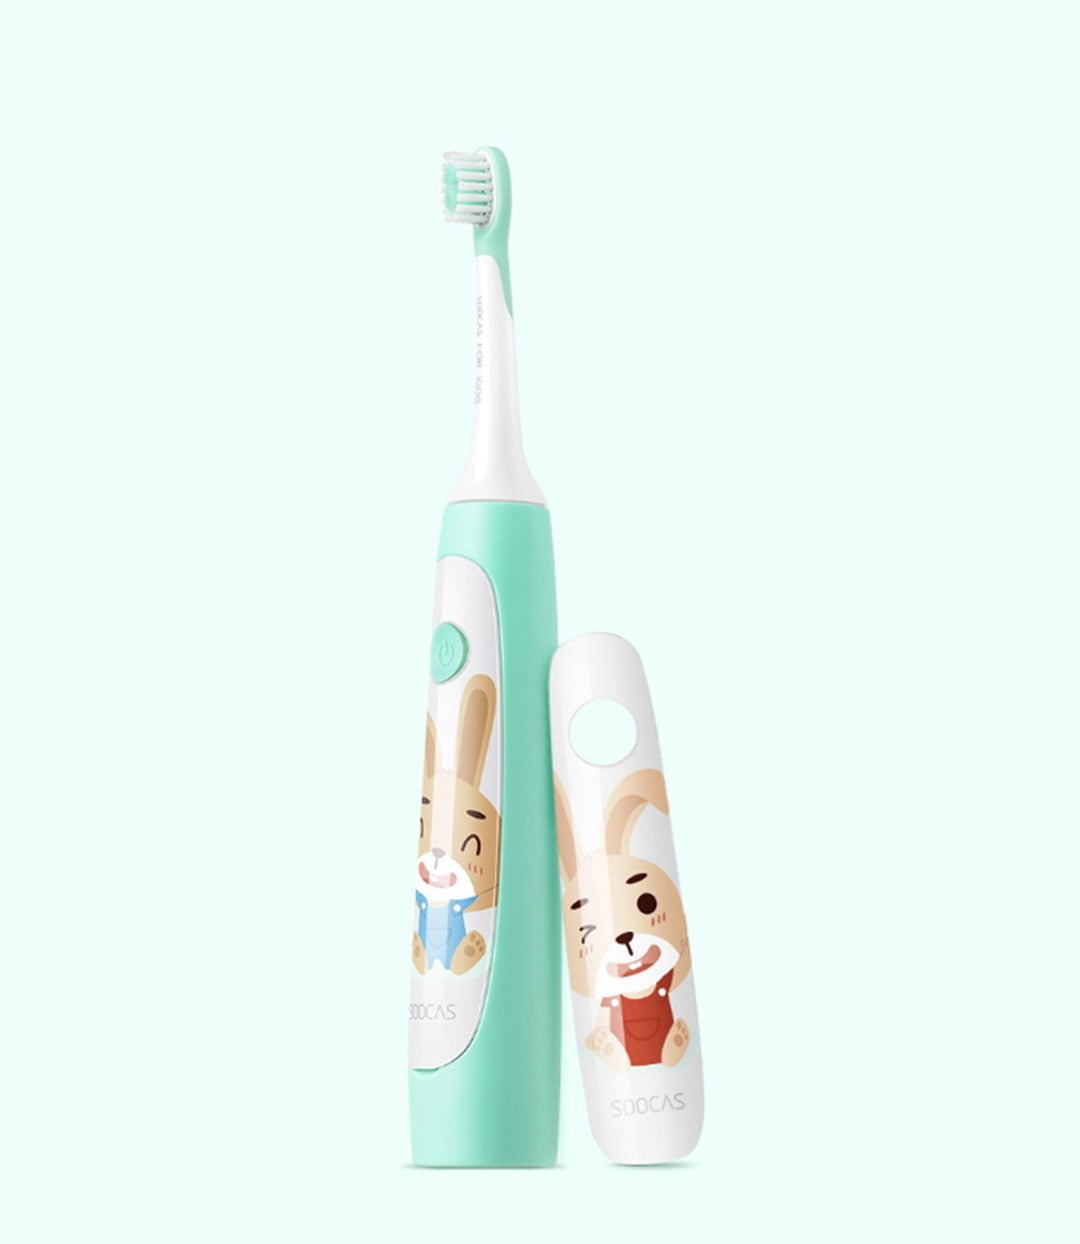 00Des Xiaomi Soocas Kids Electric Toothbrush Xiaomi &Lt;Div Class=&Quot;Product-Description&Quot;&Gt;The Capacity Of Soocas Children'S Toothbrush Battery Is 800 Mah, Which Can Be Used For Up To 20 Days At A Frequency Of 2 Minutes Per Day For 2 Times.&Lt;/Div&Gt; Soocas Kids Sonic Electric Toothbrush